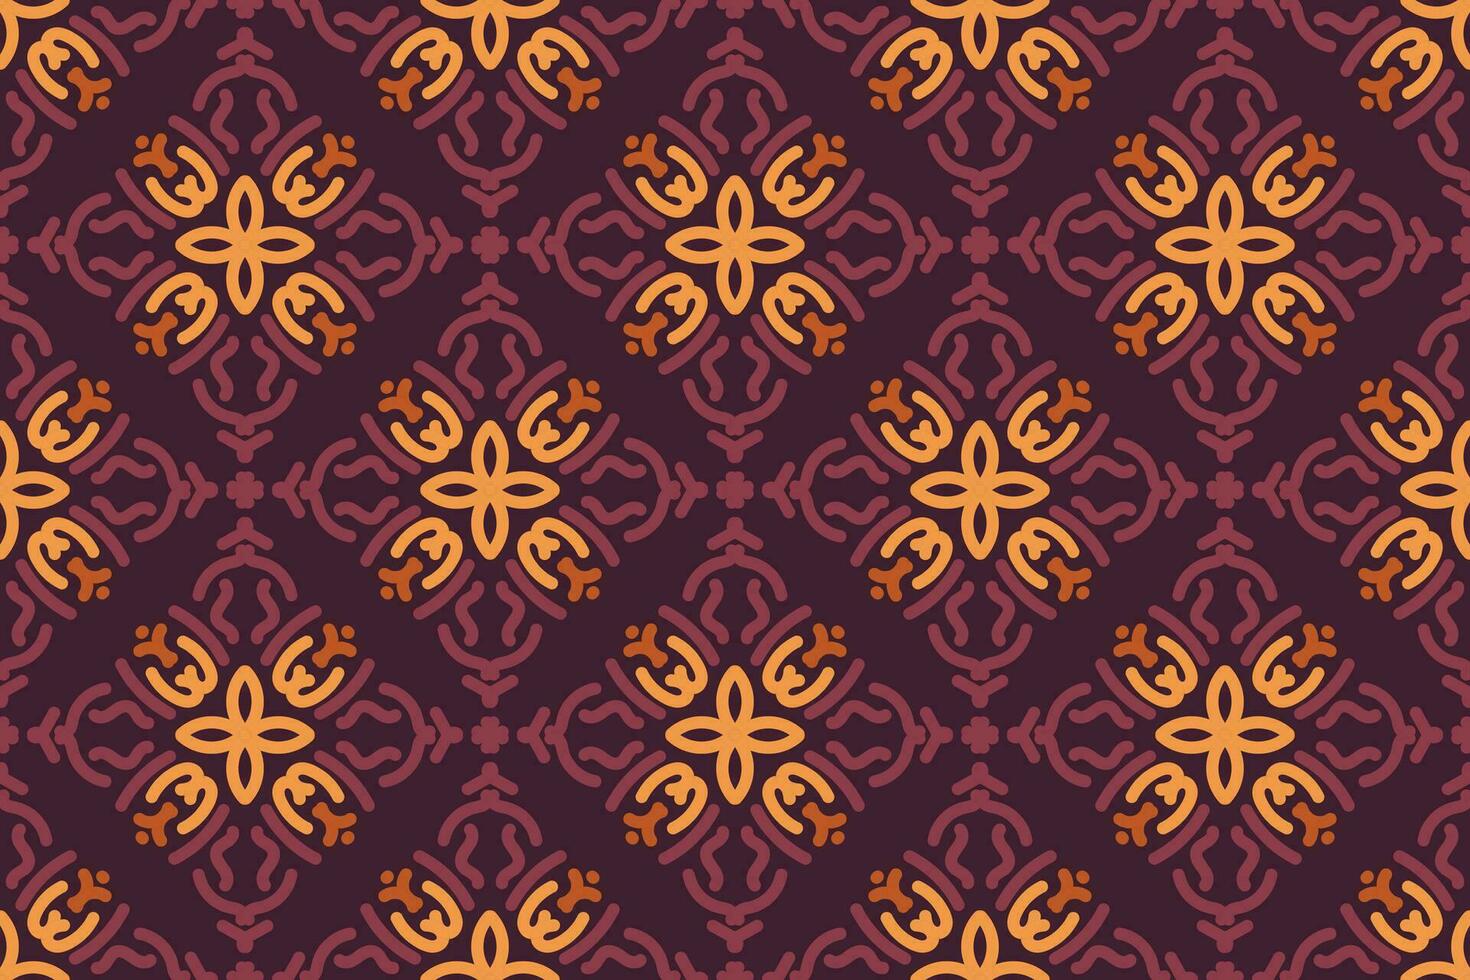 oriental pattern. purple and orange background with Arabic ornaments. Patterns, backgrounds and wallpapers for your design. Textile ornament. Vector illustration.